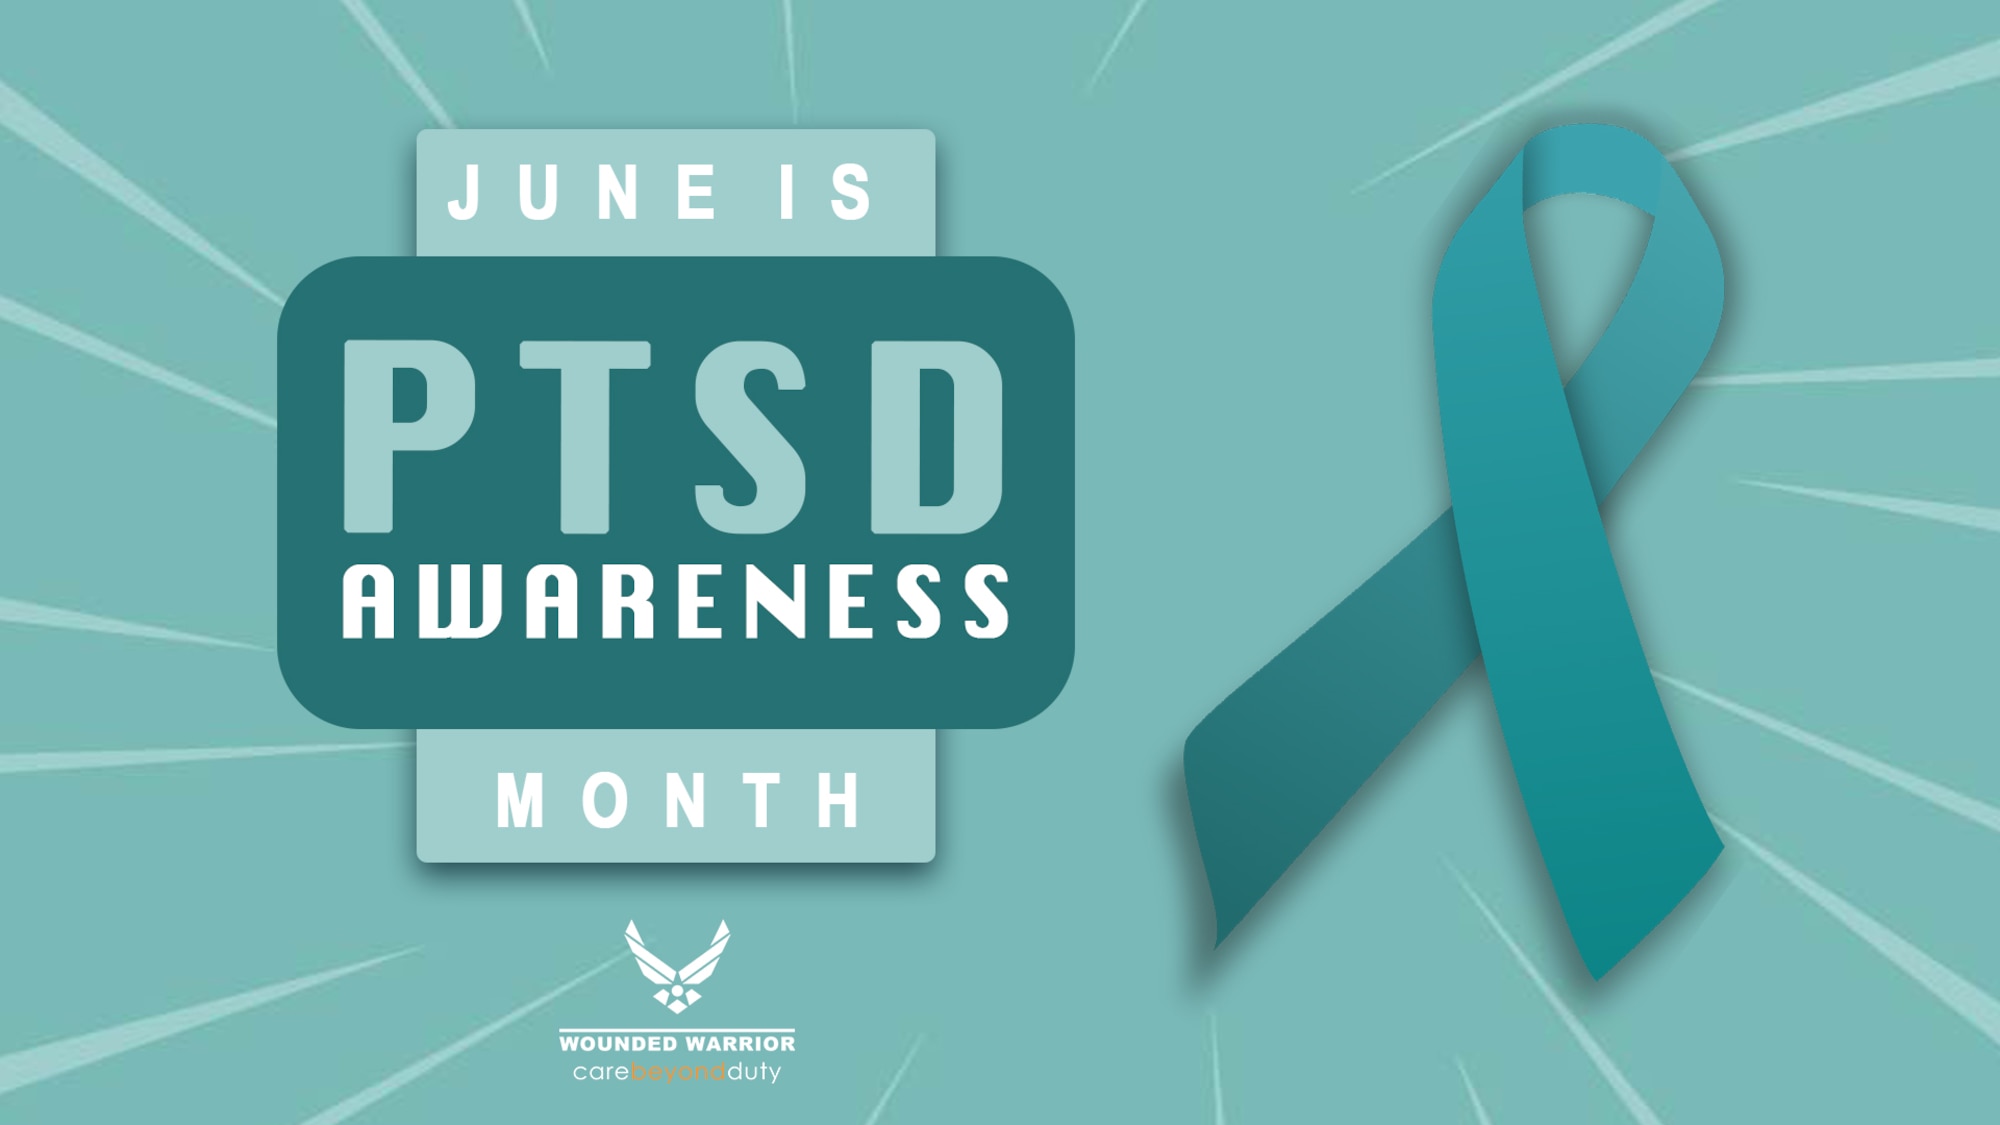 The National Center for Post-Traumatic Stress Disorder (PTSD) has designated June as National PTSD Awareness Month. As stated by the National Institute of Mental Health, PTSD is a mental health disorder that develops in individuals who have experienced or witnessed a traumatic event like, combat, a natural disaster, an accident, abuse, or assault.